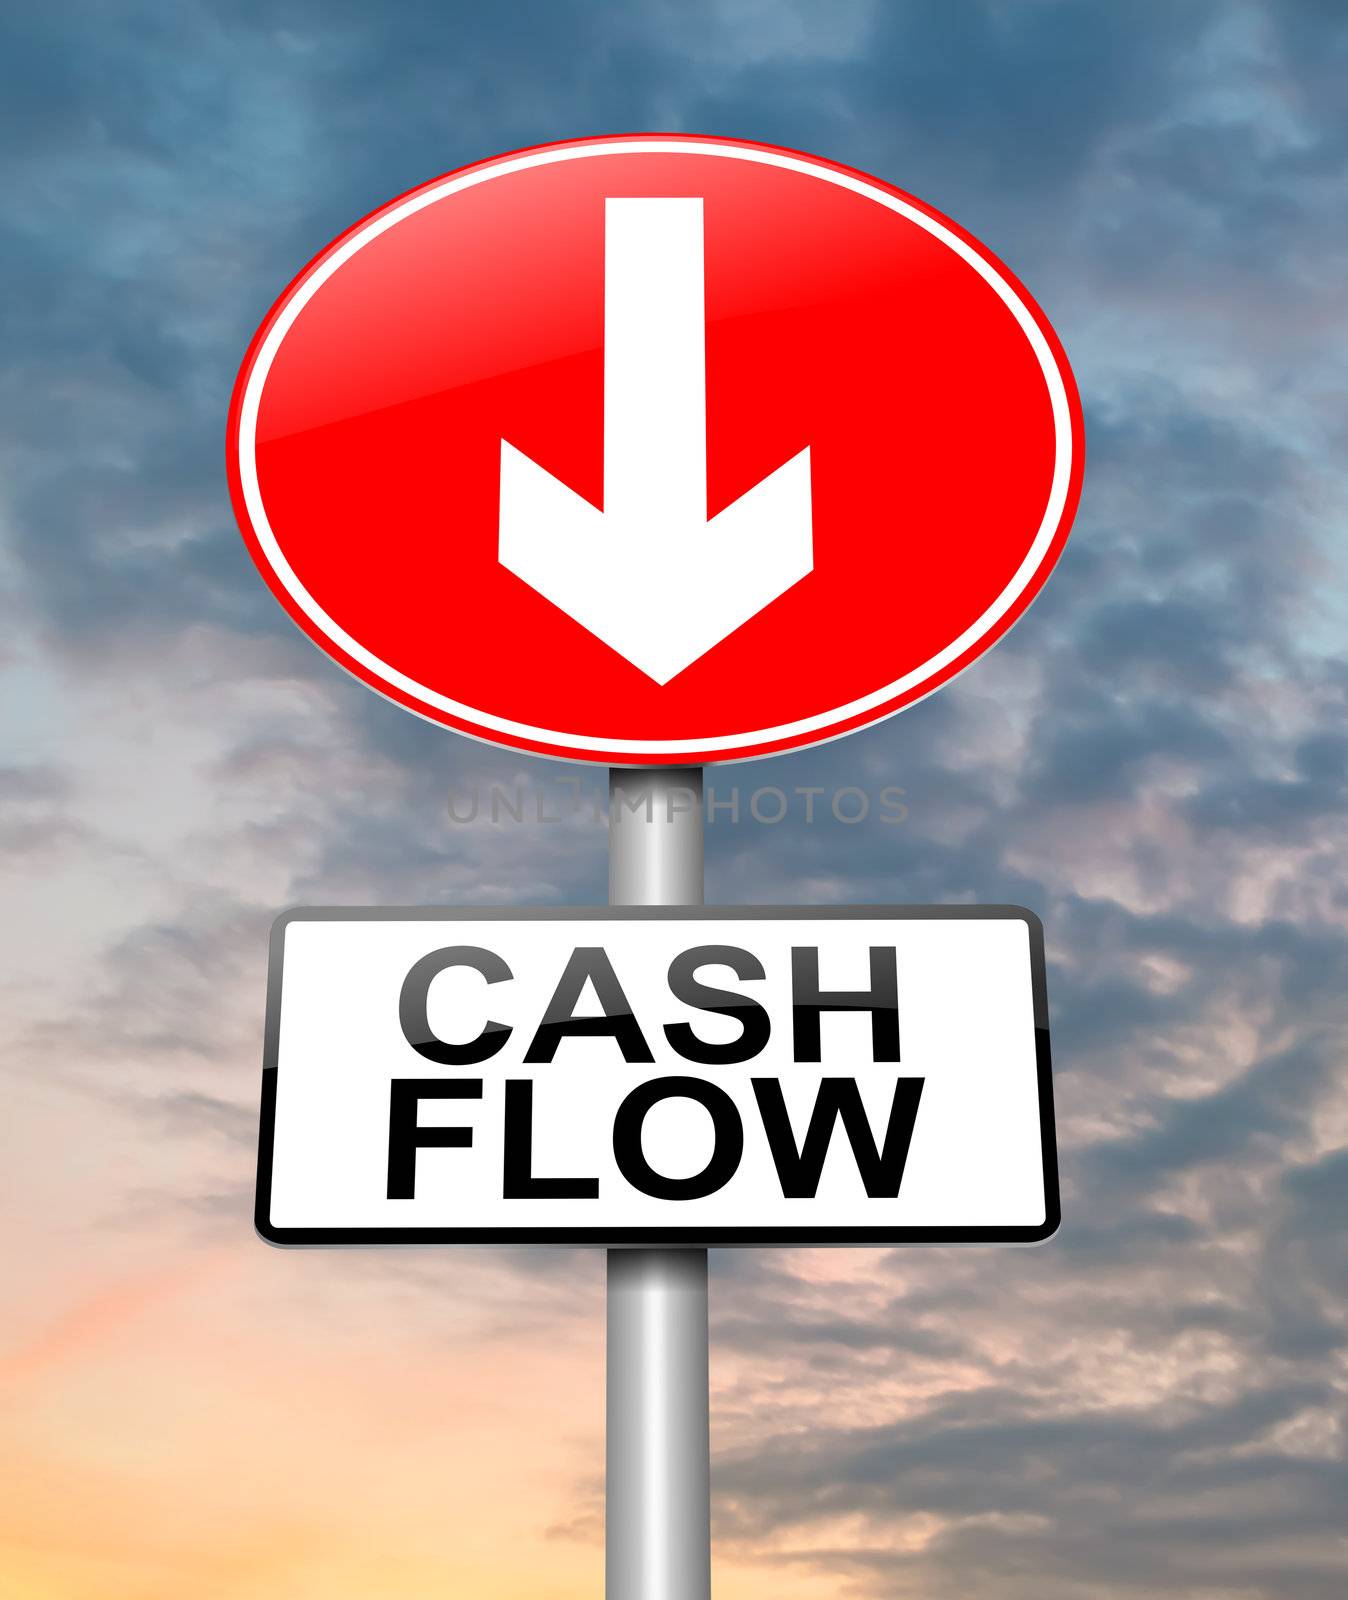 Illustration depicting a roadsign with a cash flow concept. Cloudy dusk sky background.